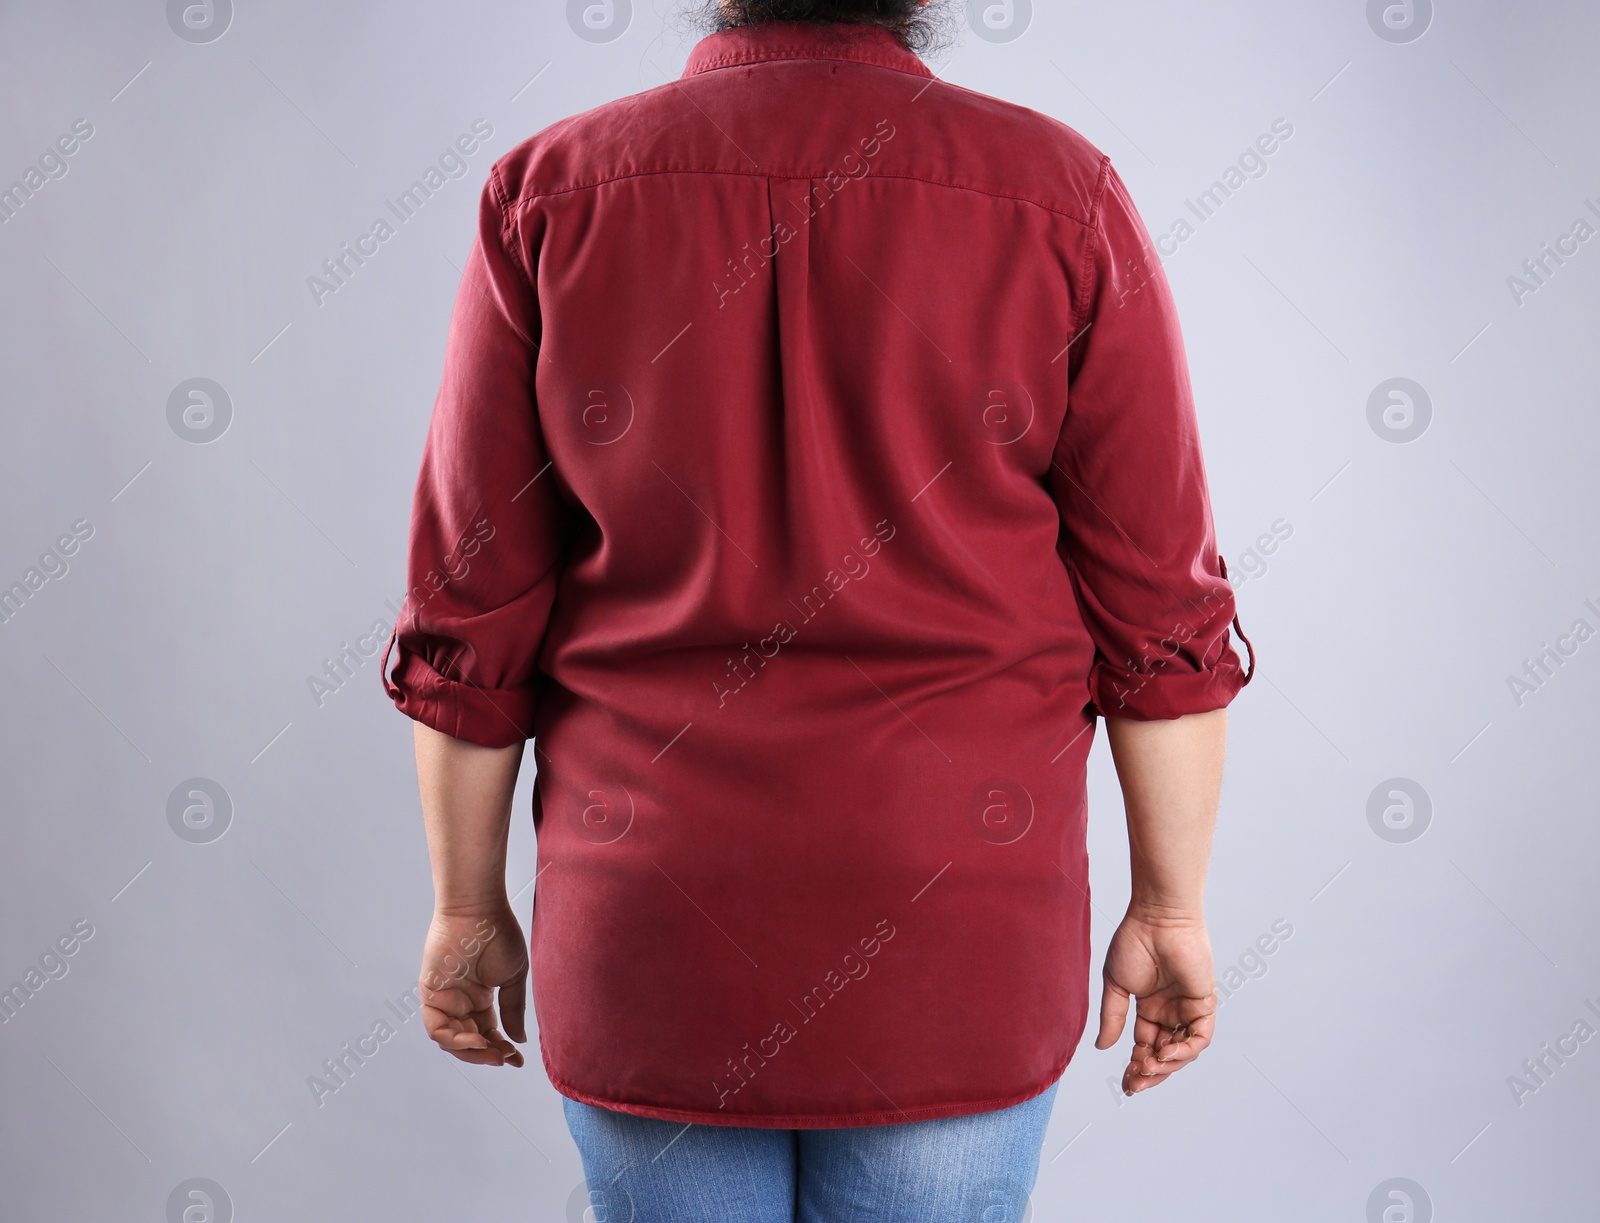 Photo of Fat woman on grey background, closeup. Weight loss